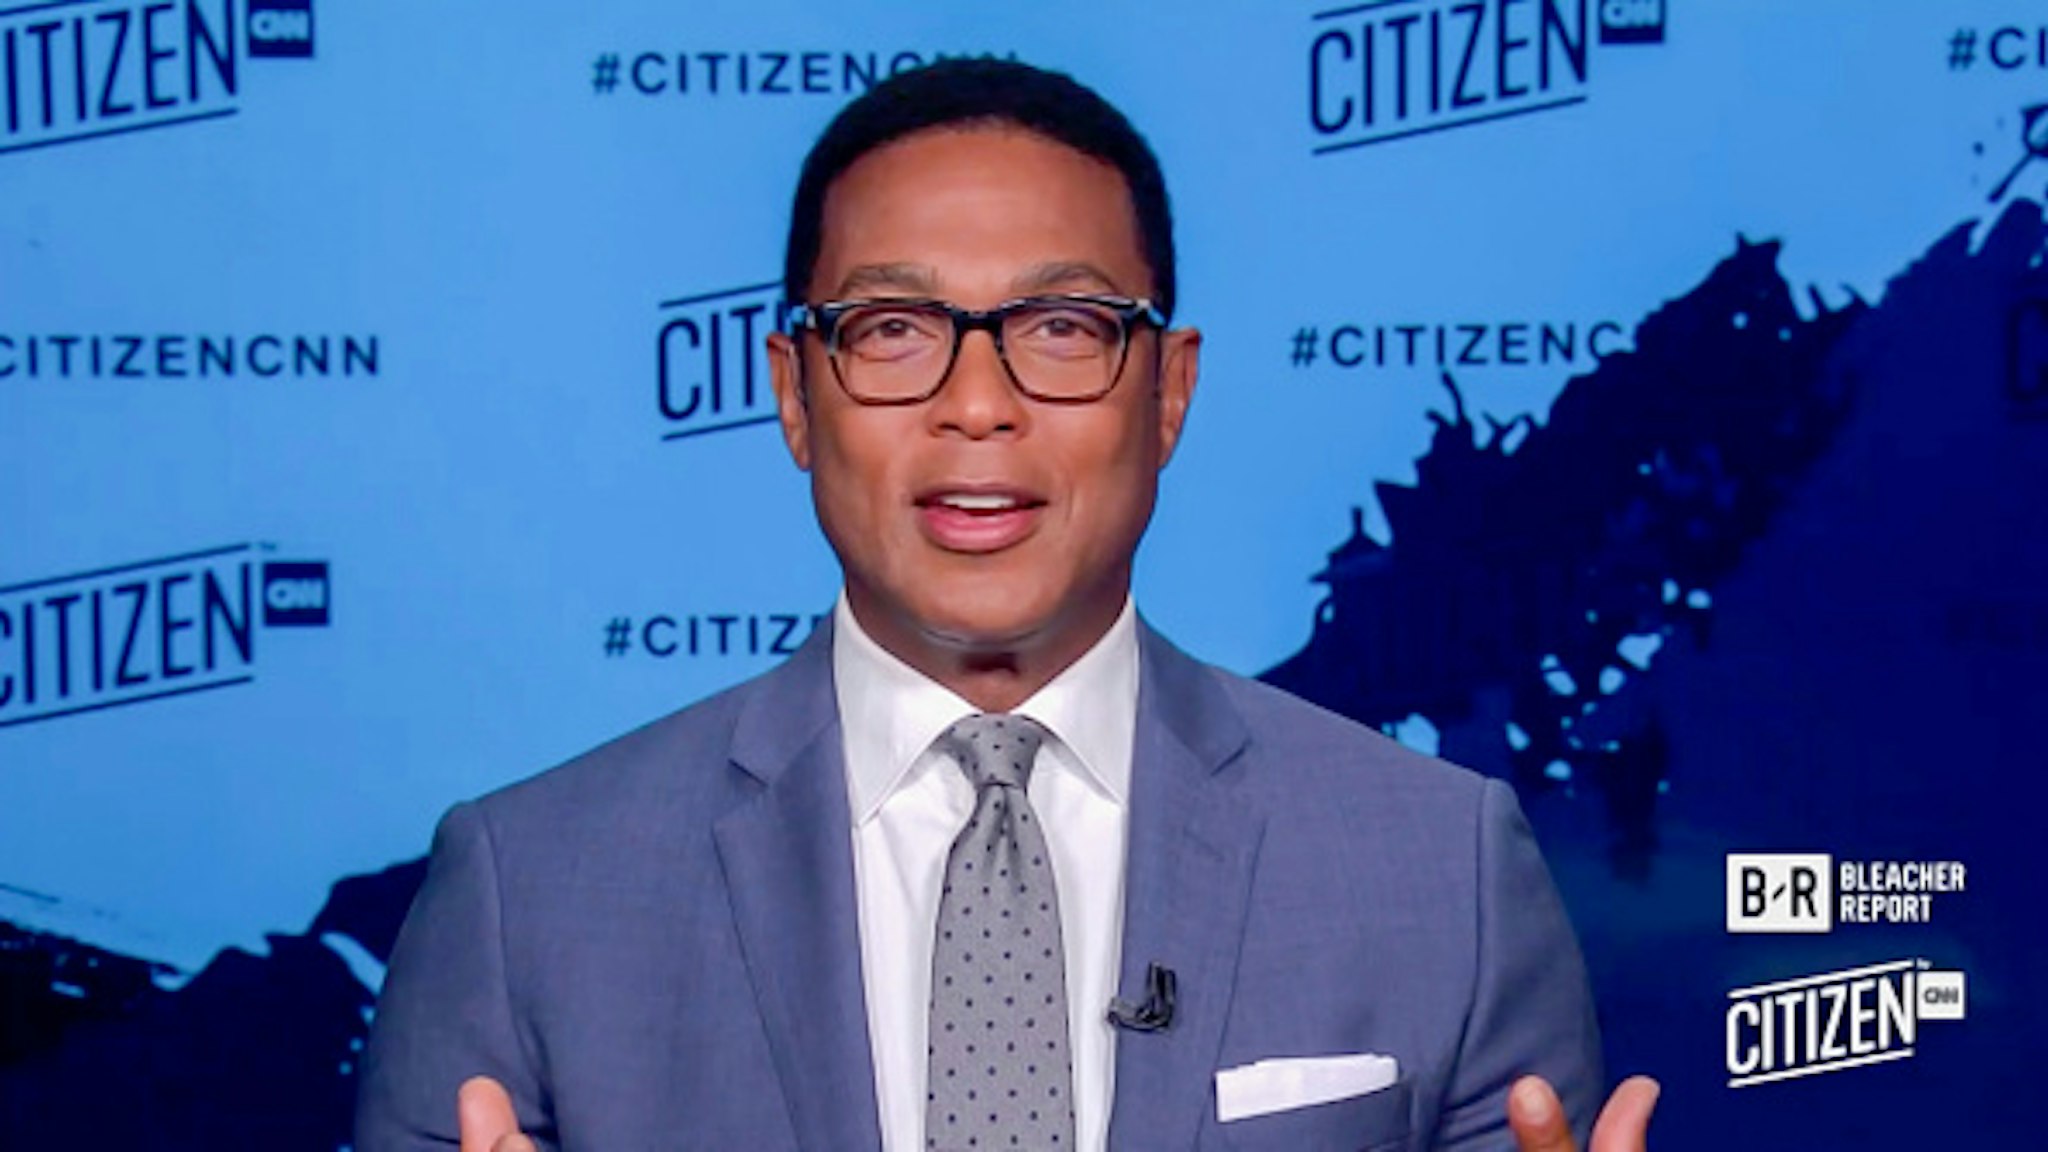 UNSPECIFIED - SEPTEMBER 22: In this screengrab Don Lemon speaks during the CITIZEN by CNN 2020 Conference on September 22, 2020 in UNSPECIFIED, United States.